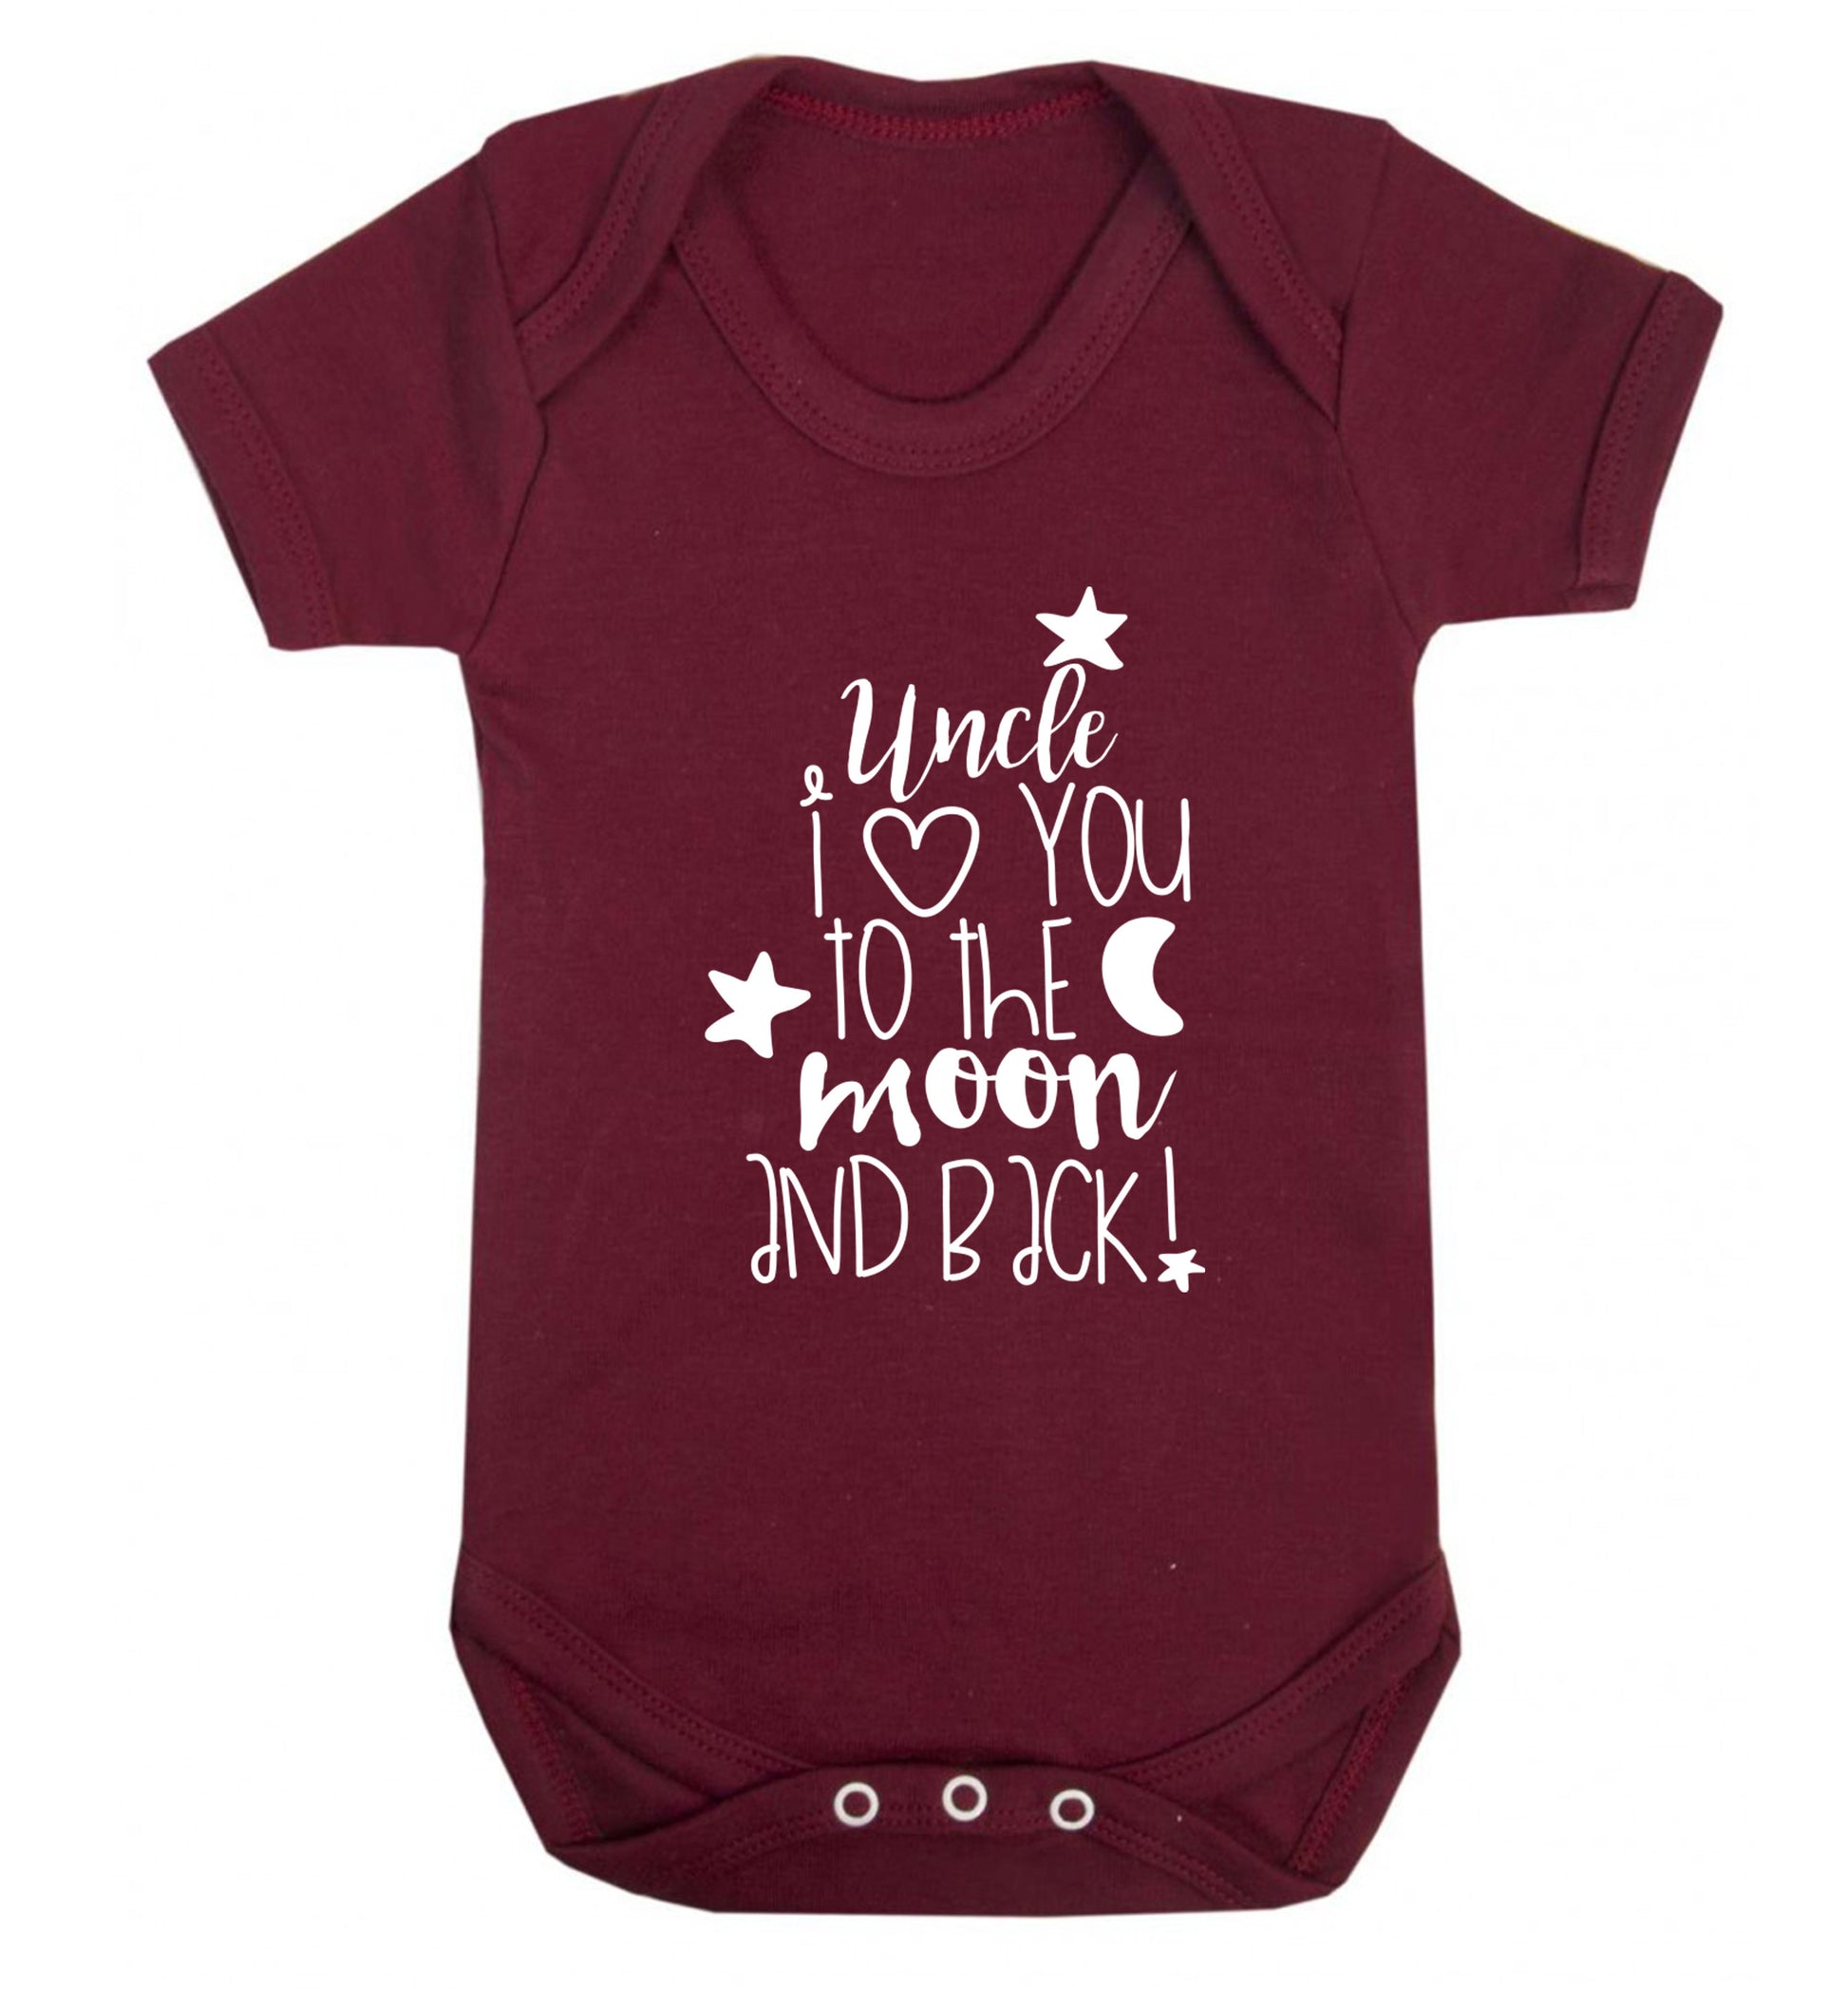 Uncle I love you to the moon and back Baby Vest maroon 18-24 months